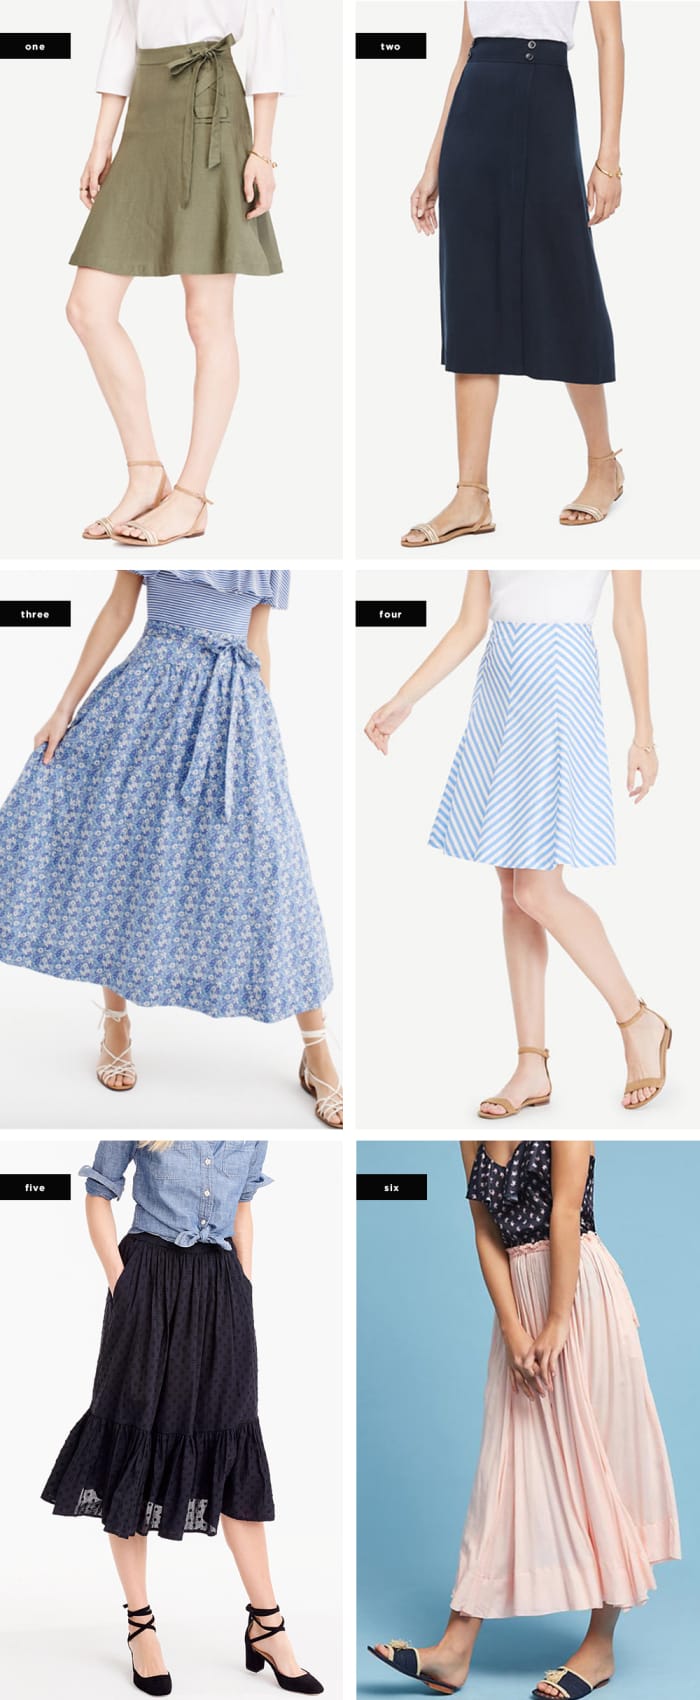 Feminine Skirts (on Sale) That Will Save You from This Heat - Verily